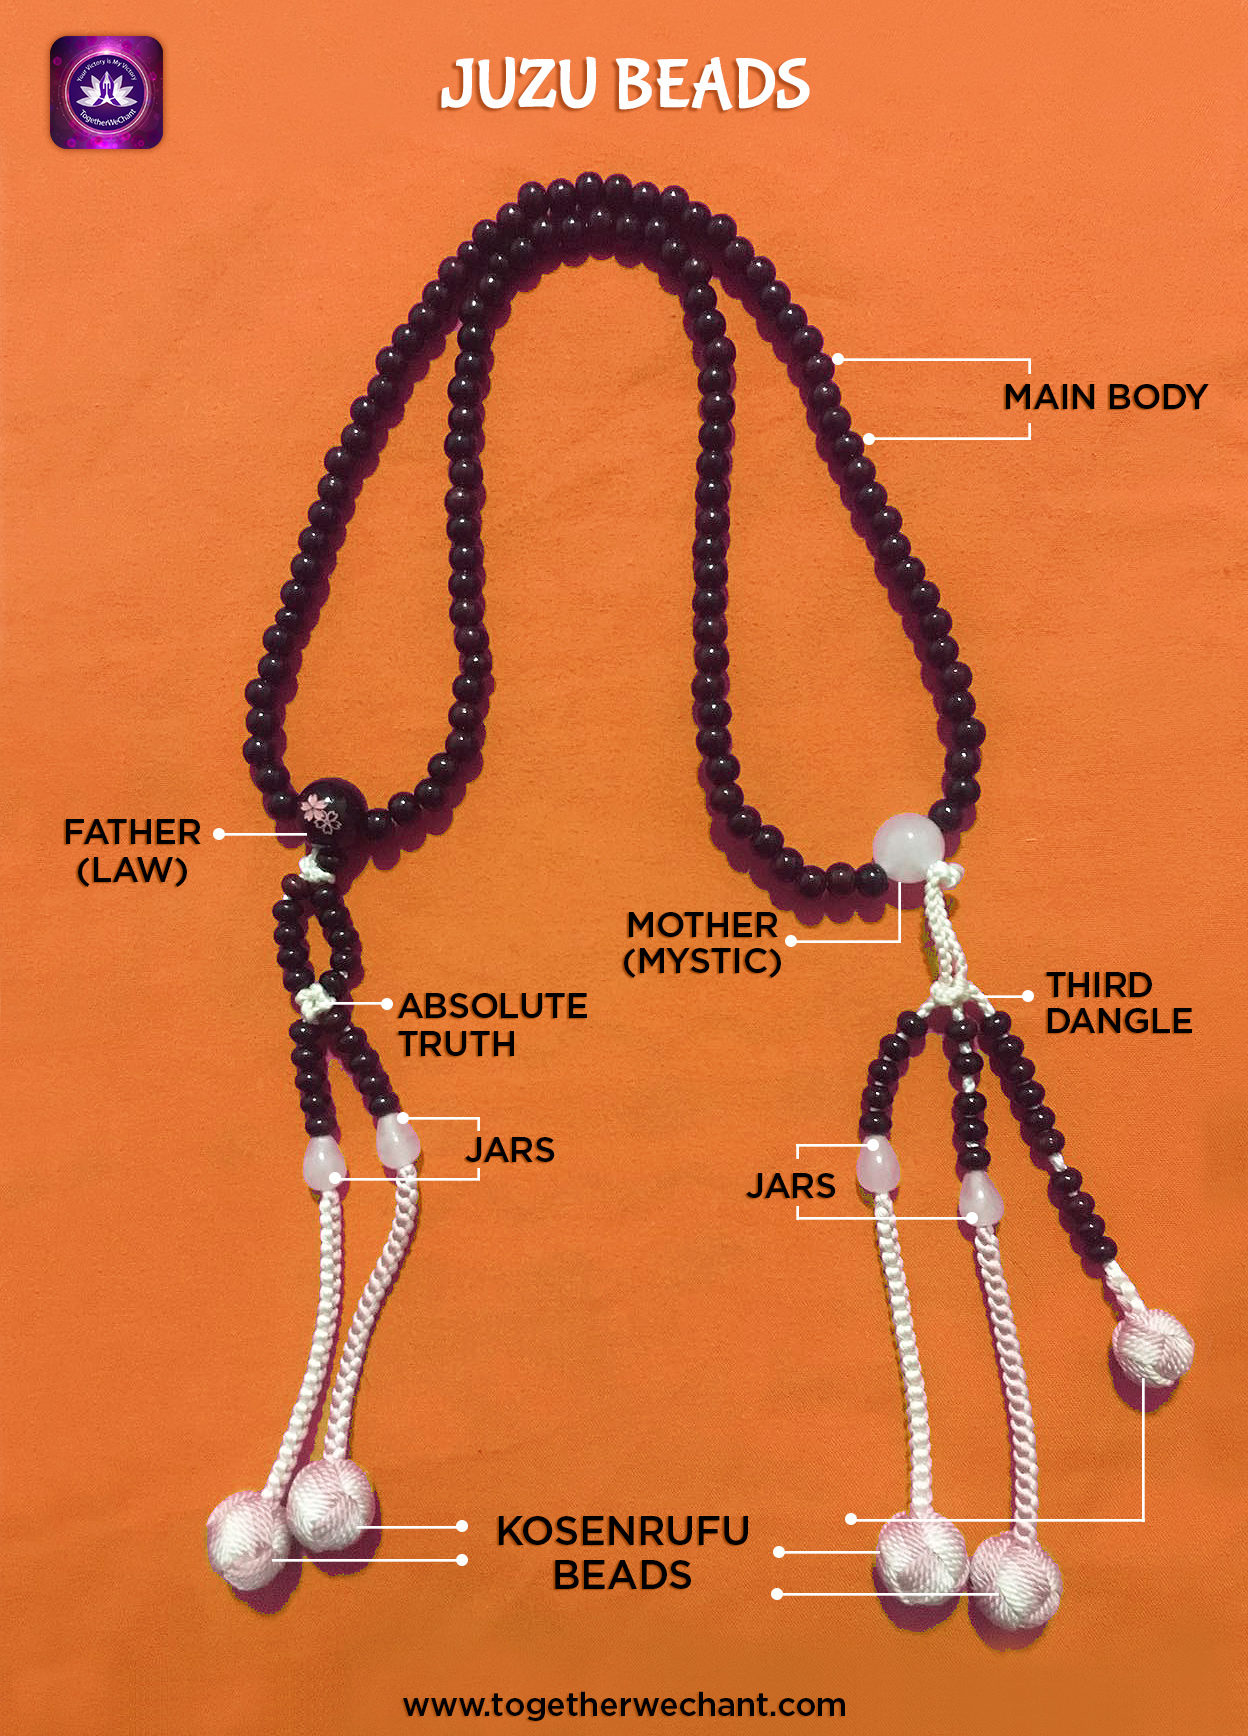 JUZU BEADS – Let's get to know these Prayer Beads even better ...